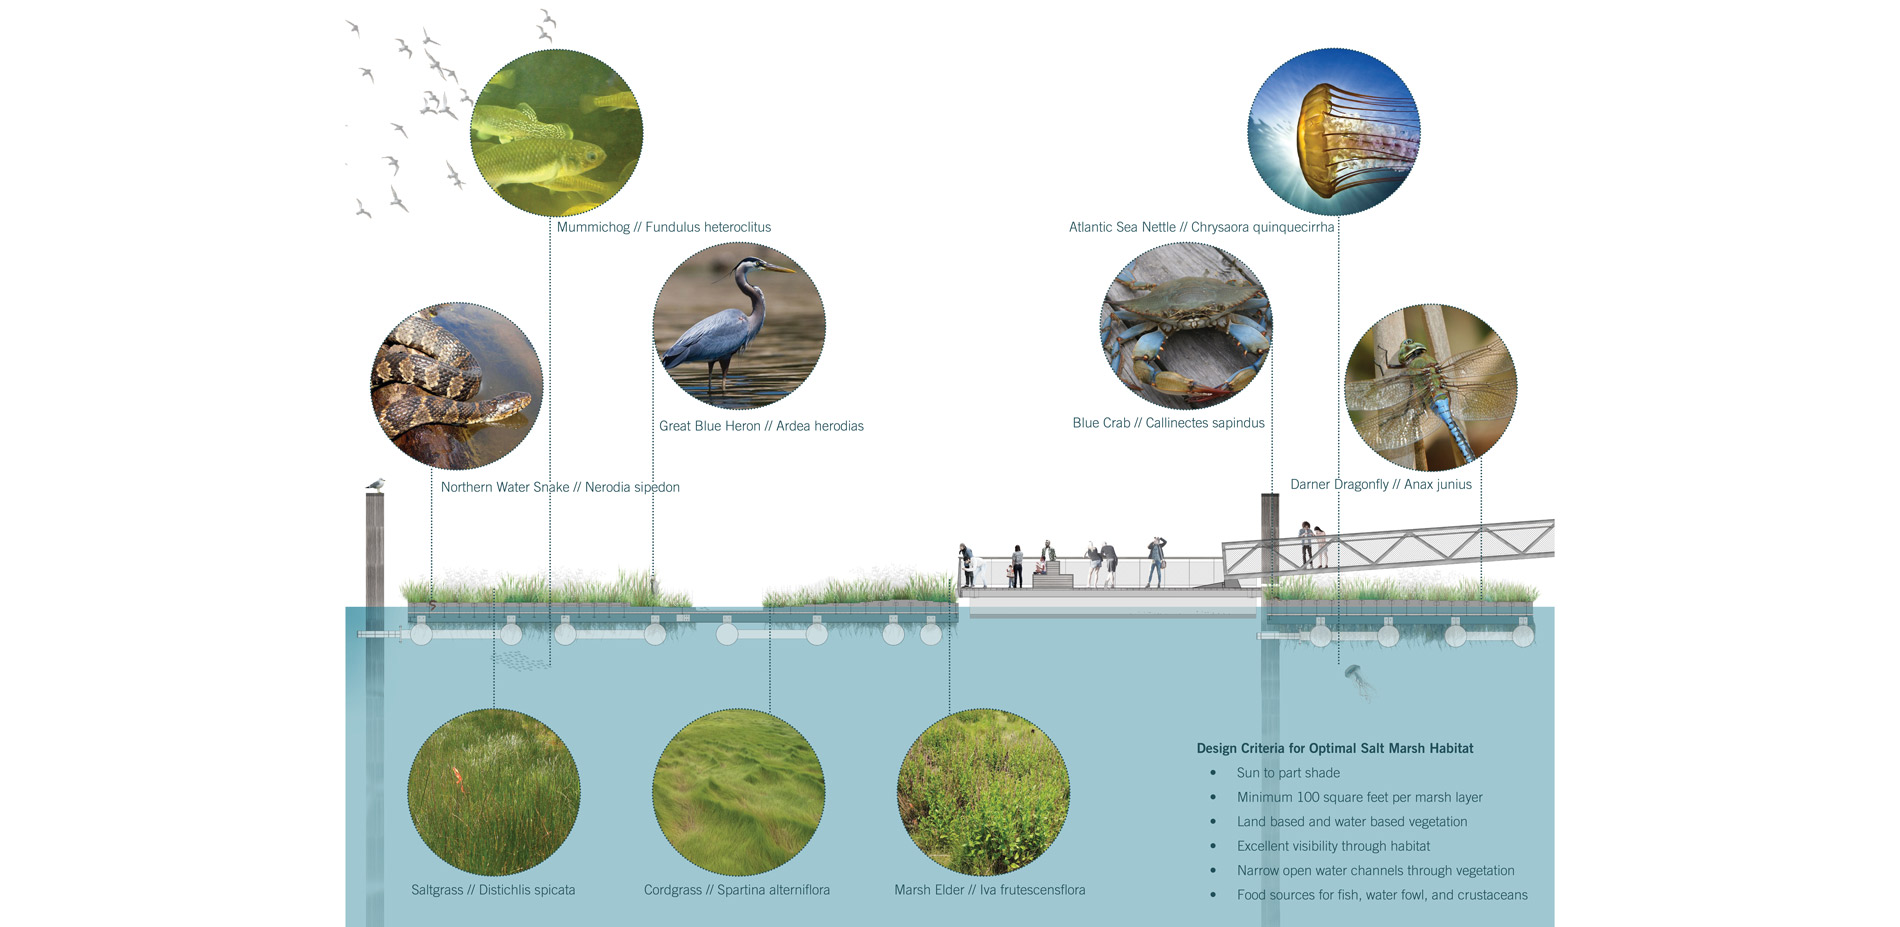 The research team worked with the National Aquarium to define performance goals for the long-term wetland plan that informed the design criteria for a…